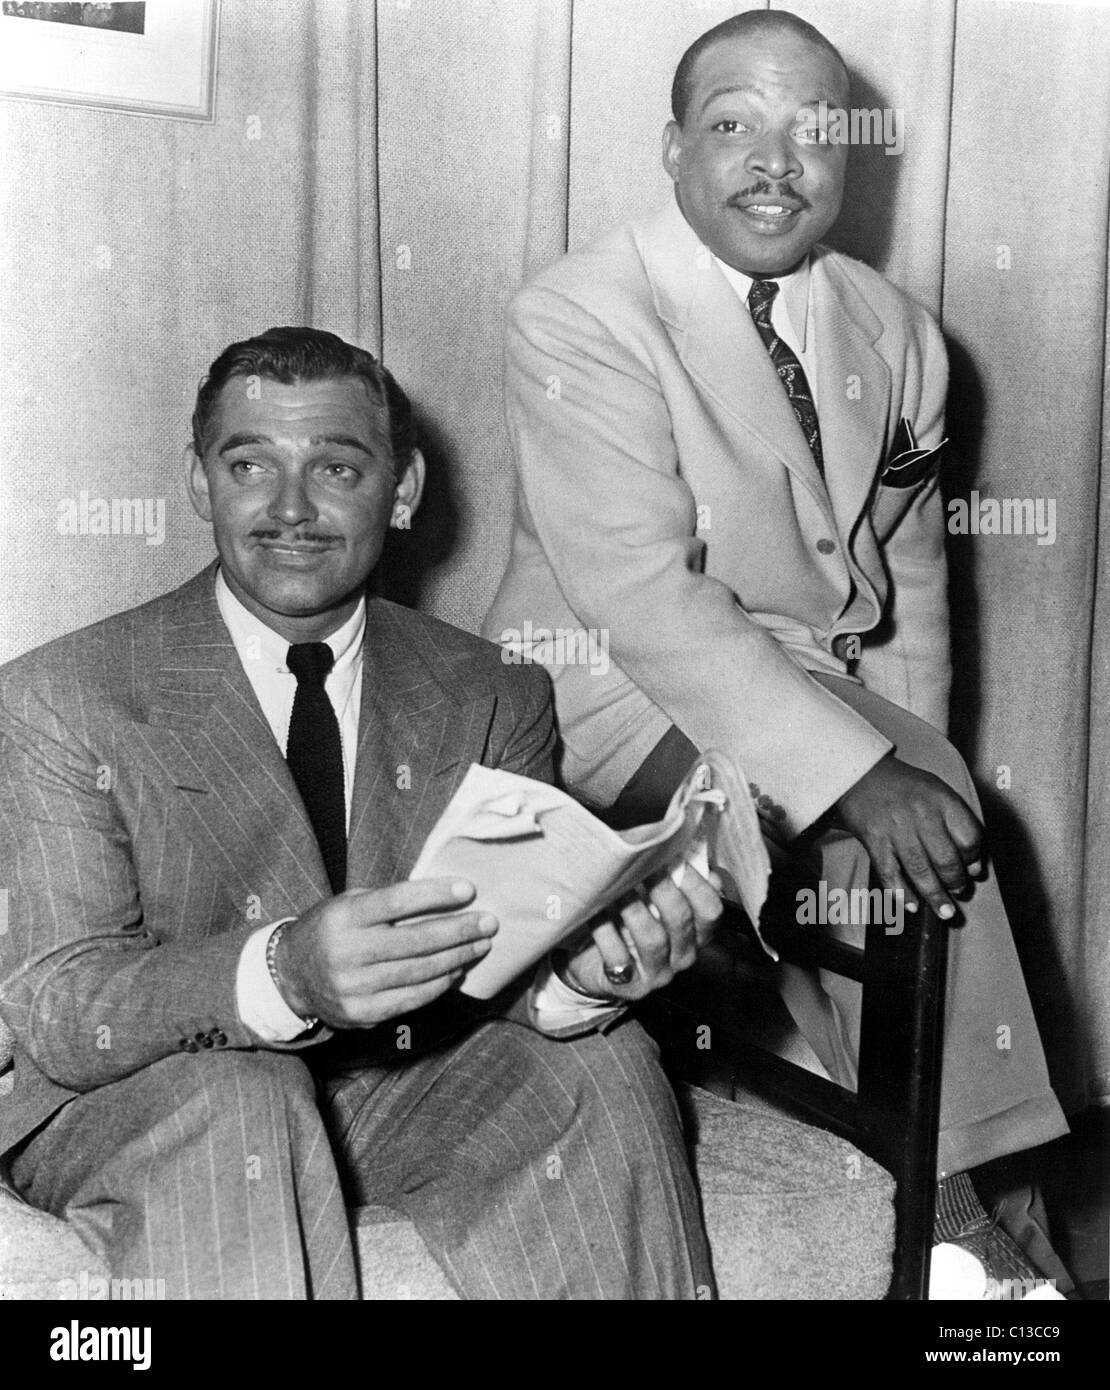 Clark Gable & Count Basie at COMMAND PERFORMANCE, 8/4/42. Stock Photo